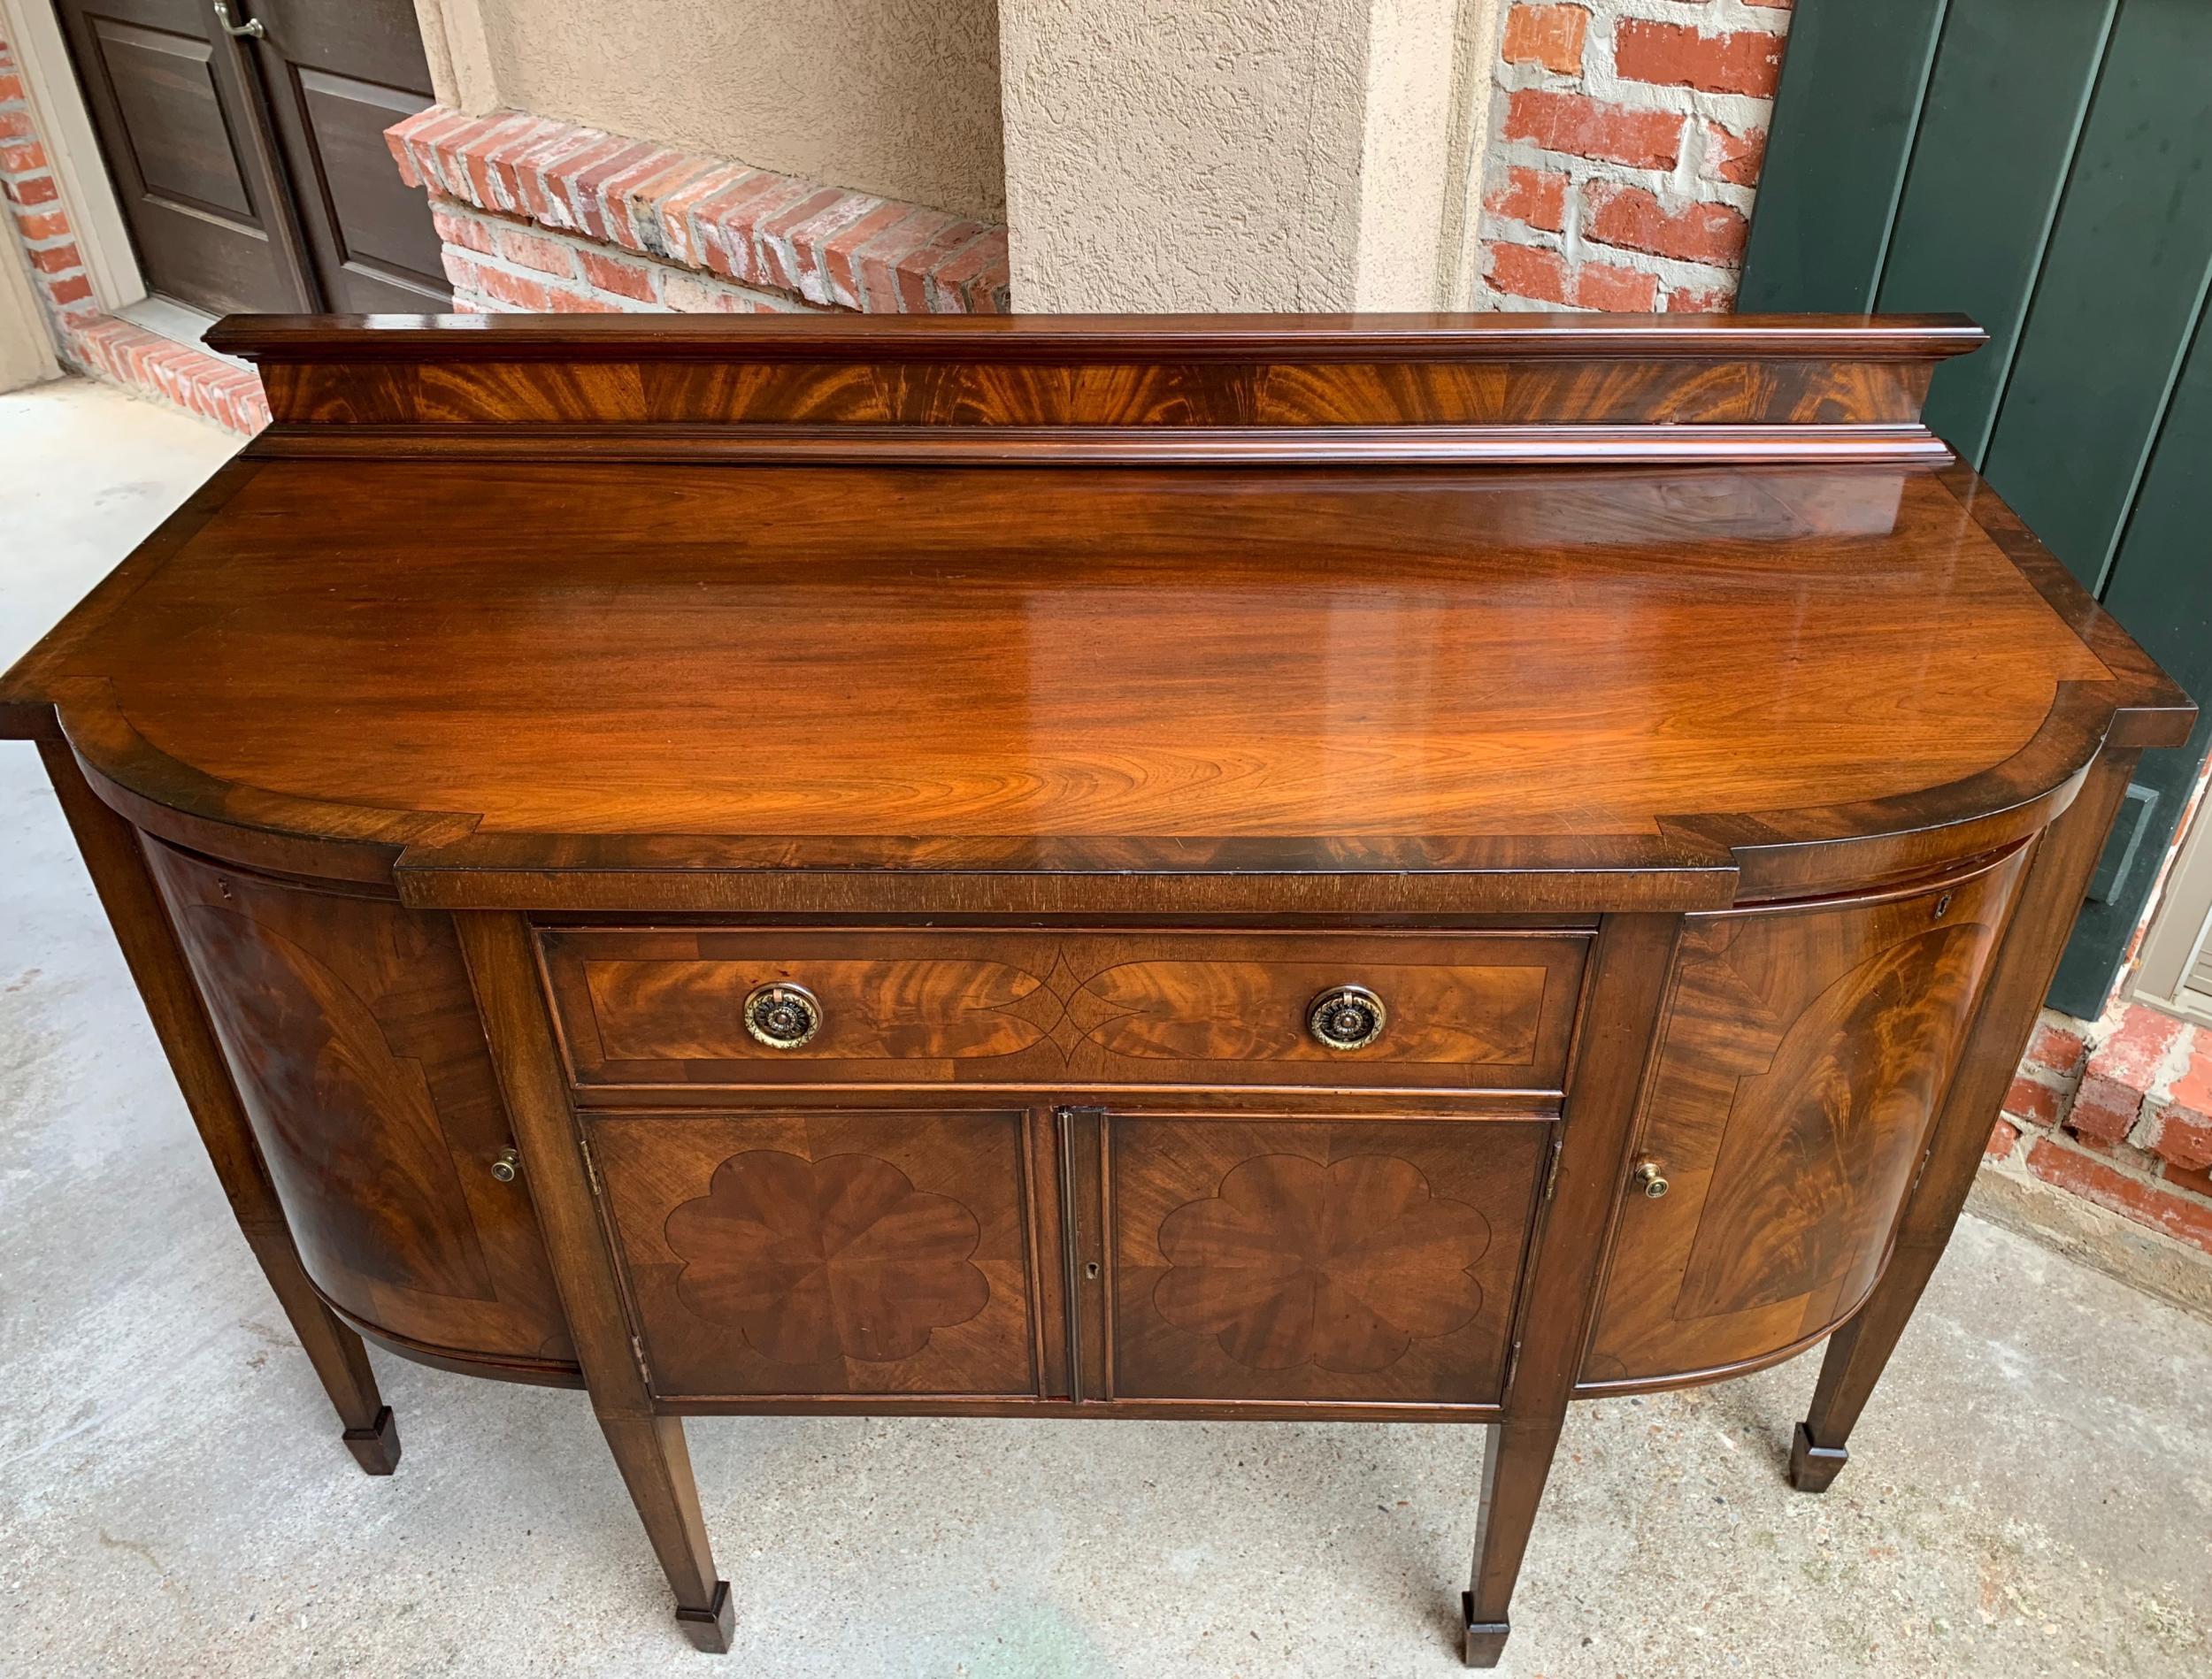 19th century inlaid flame mahogany sideboard buffet Hepplewhite Sheraton style

~From an antique dealer’s personal collection, this lovely antique Hepplewhite style mahogany sideboard~
~Block fronted with bow sides, having gorgeous inlaid and